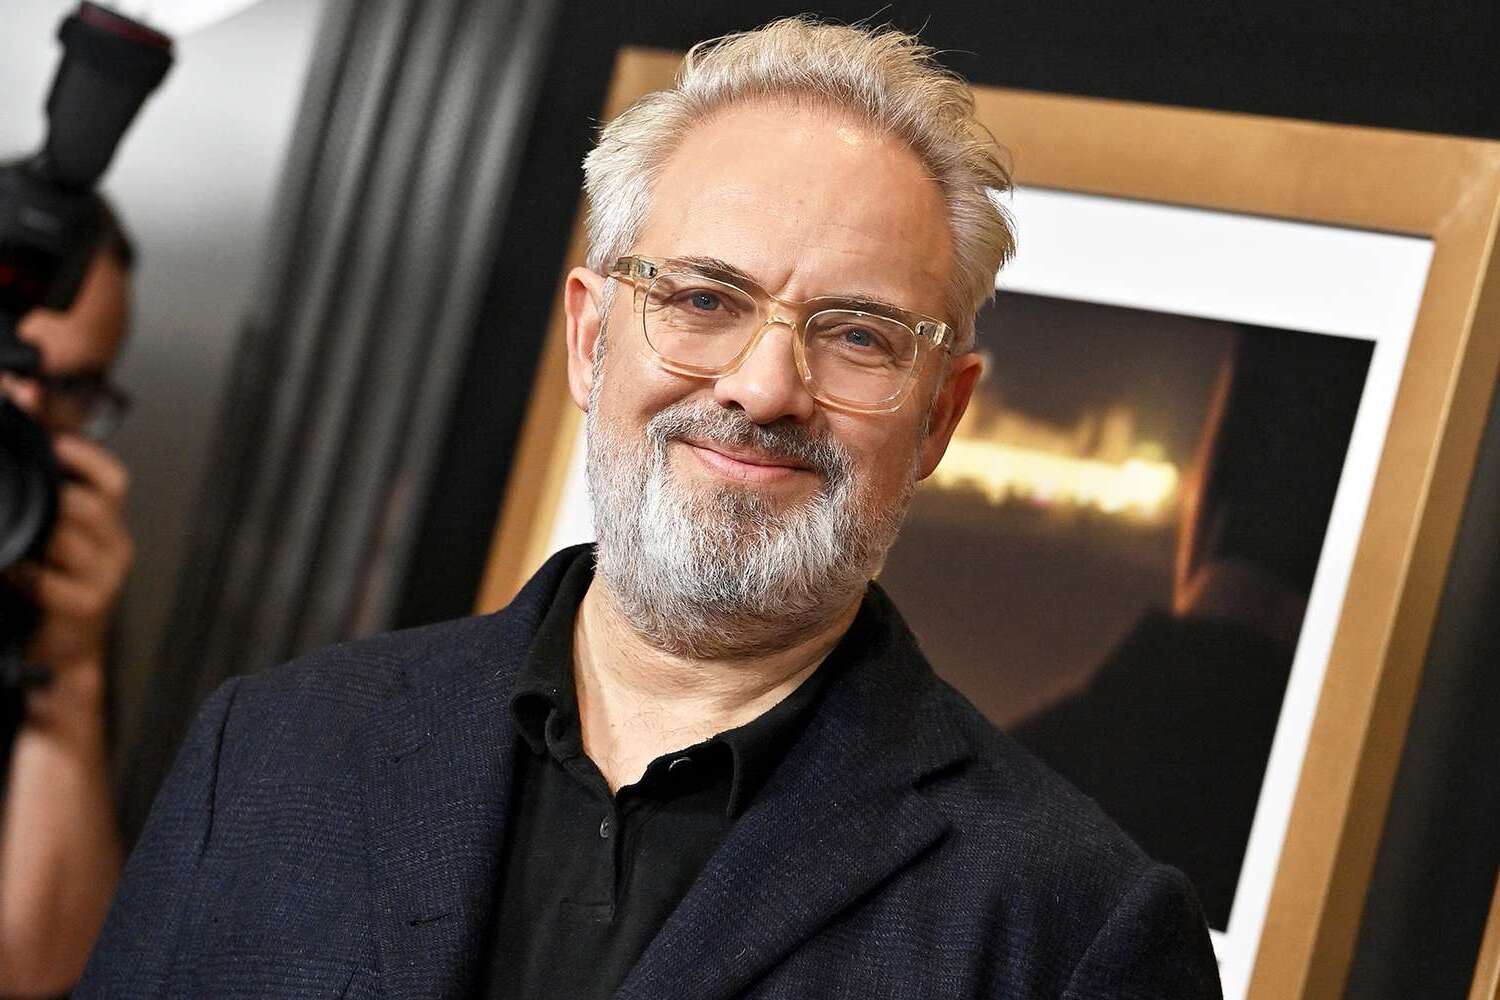 Sam Mendes Set To Direct Four Separate Beatles Movies From All Members’ POVs